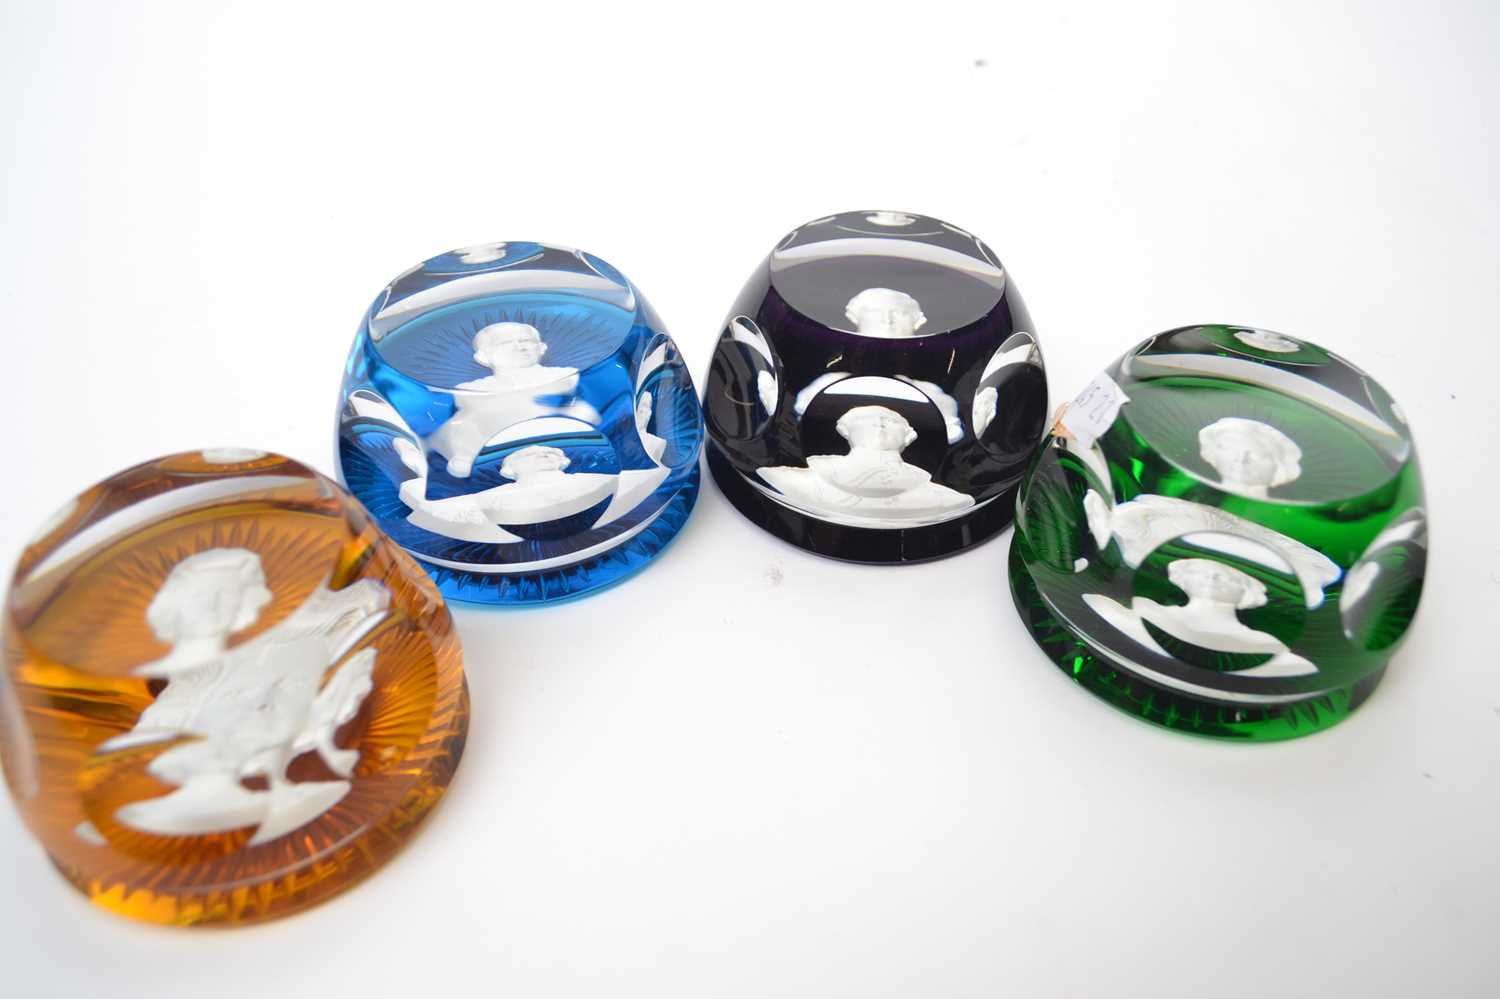 A group of four Baccarat paperweights with members of the Royal Family, Princess Anne, King